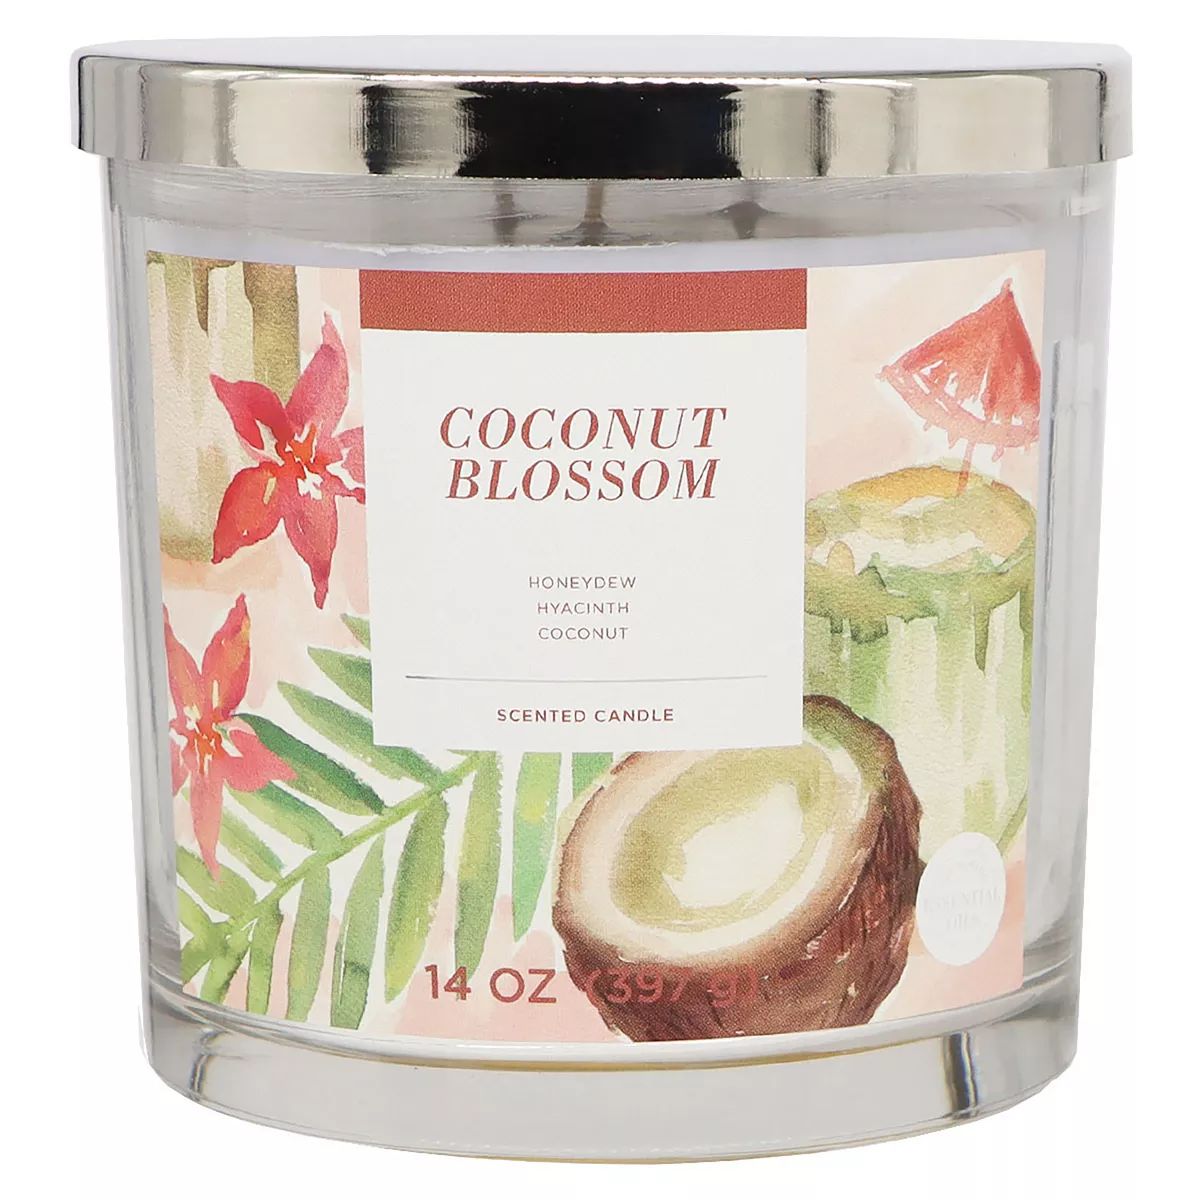 Sonoma Goods For Life® Coconut Blossom 14-oz. Single Pour Scented Candle Jar | Kohl's